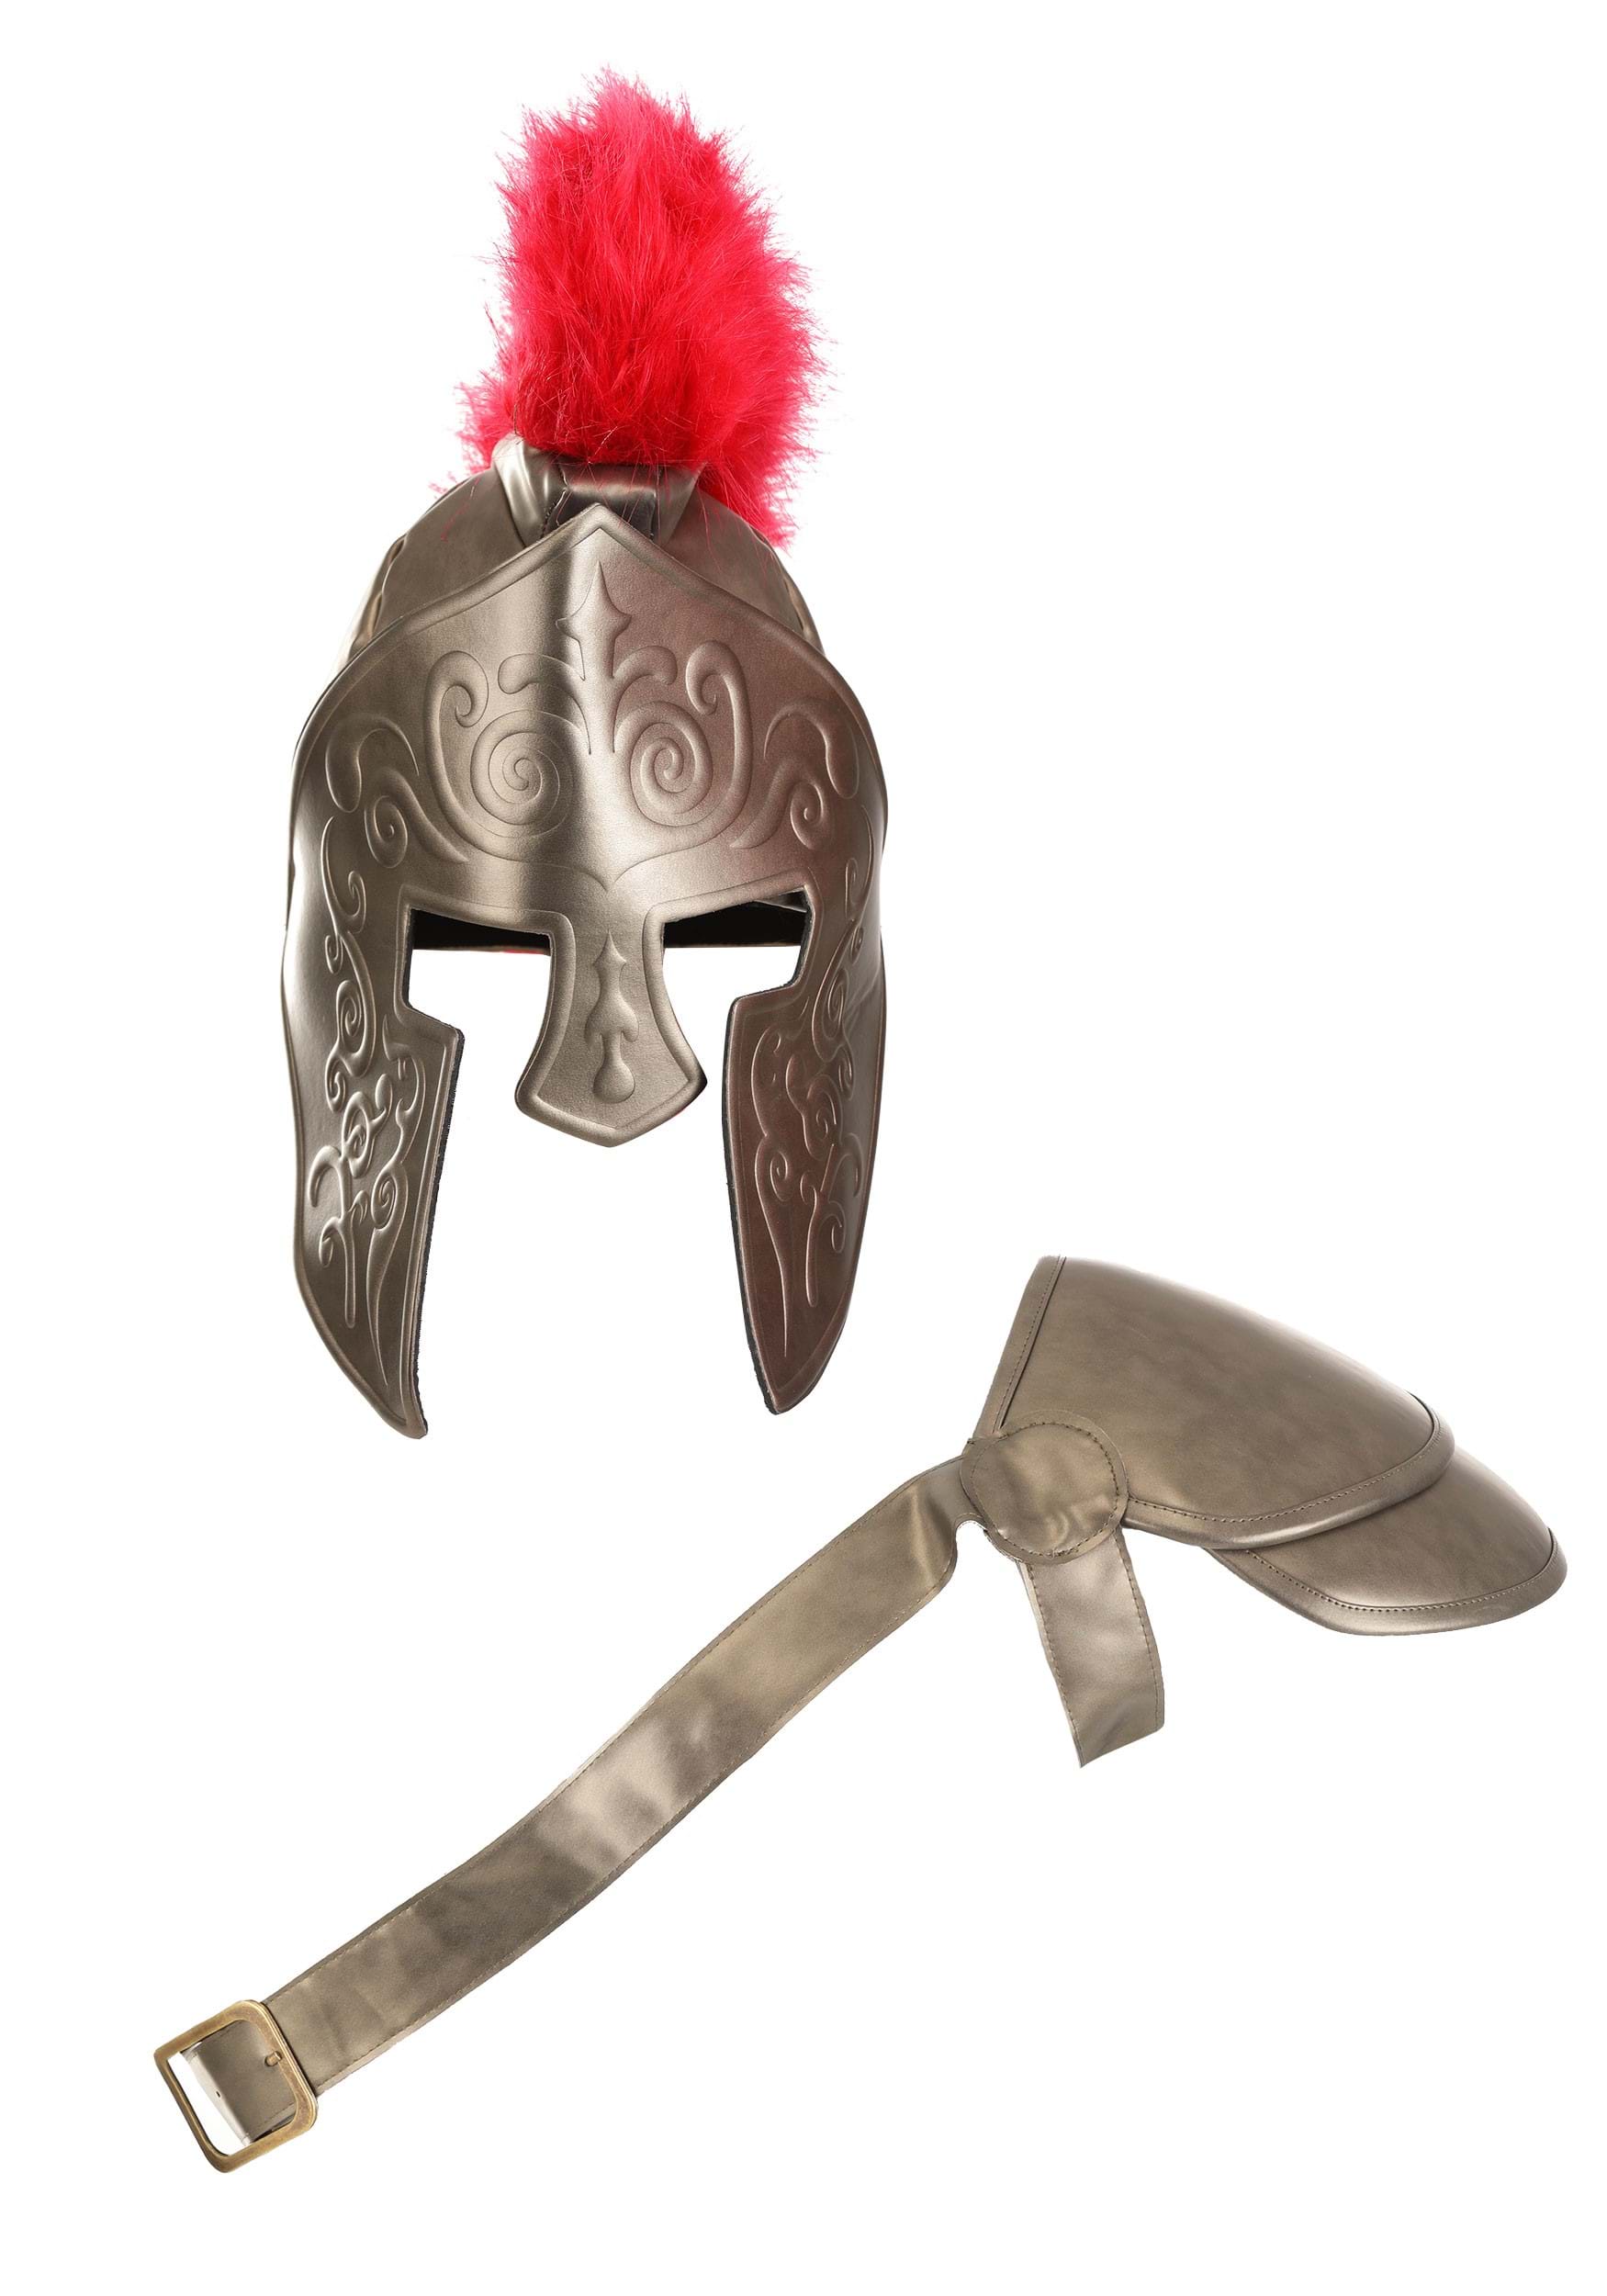 Ares Fancy Dress Costume Accessory Kit